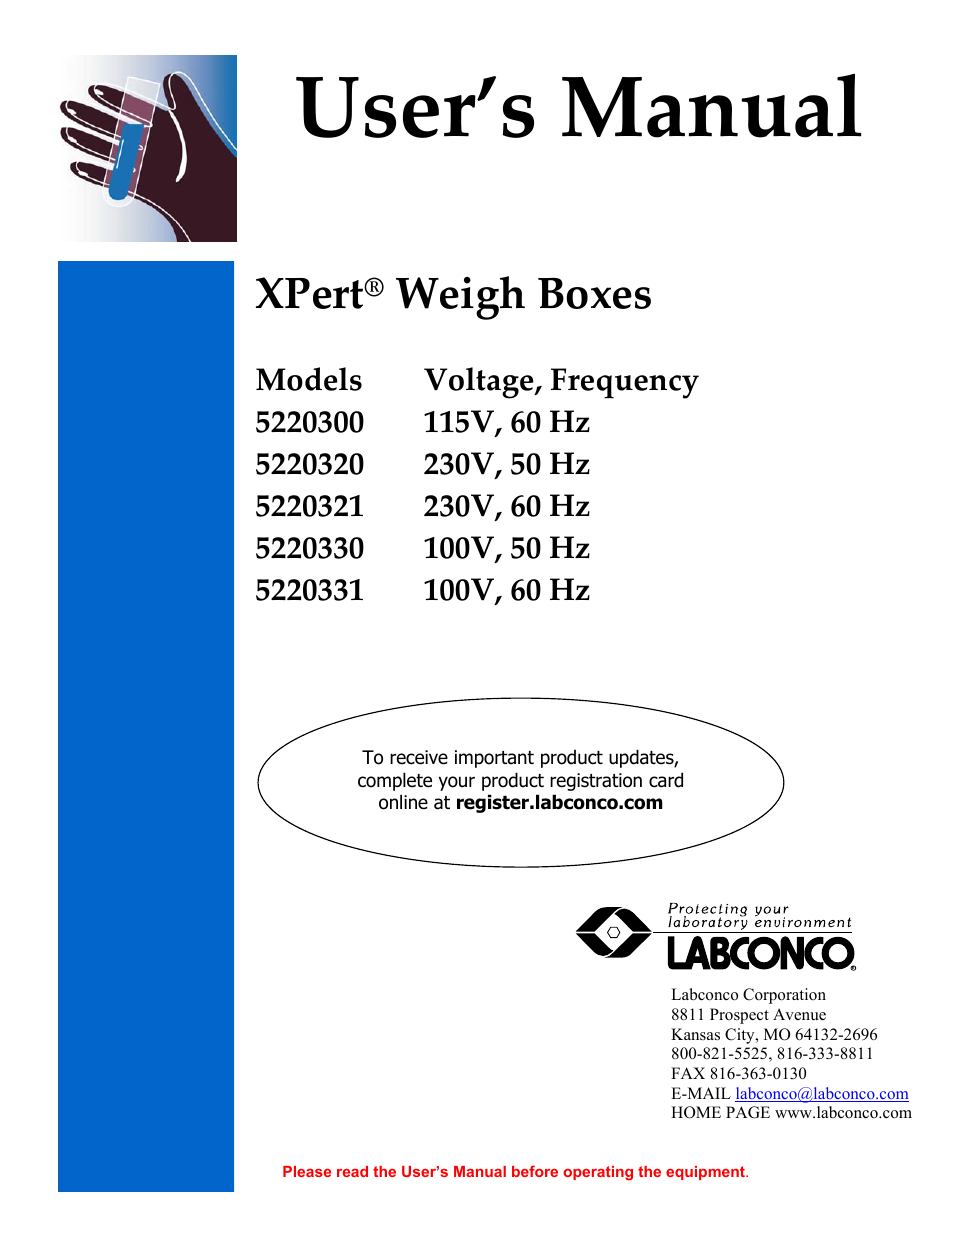 XPert Weigh Boxes 5220321